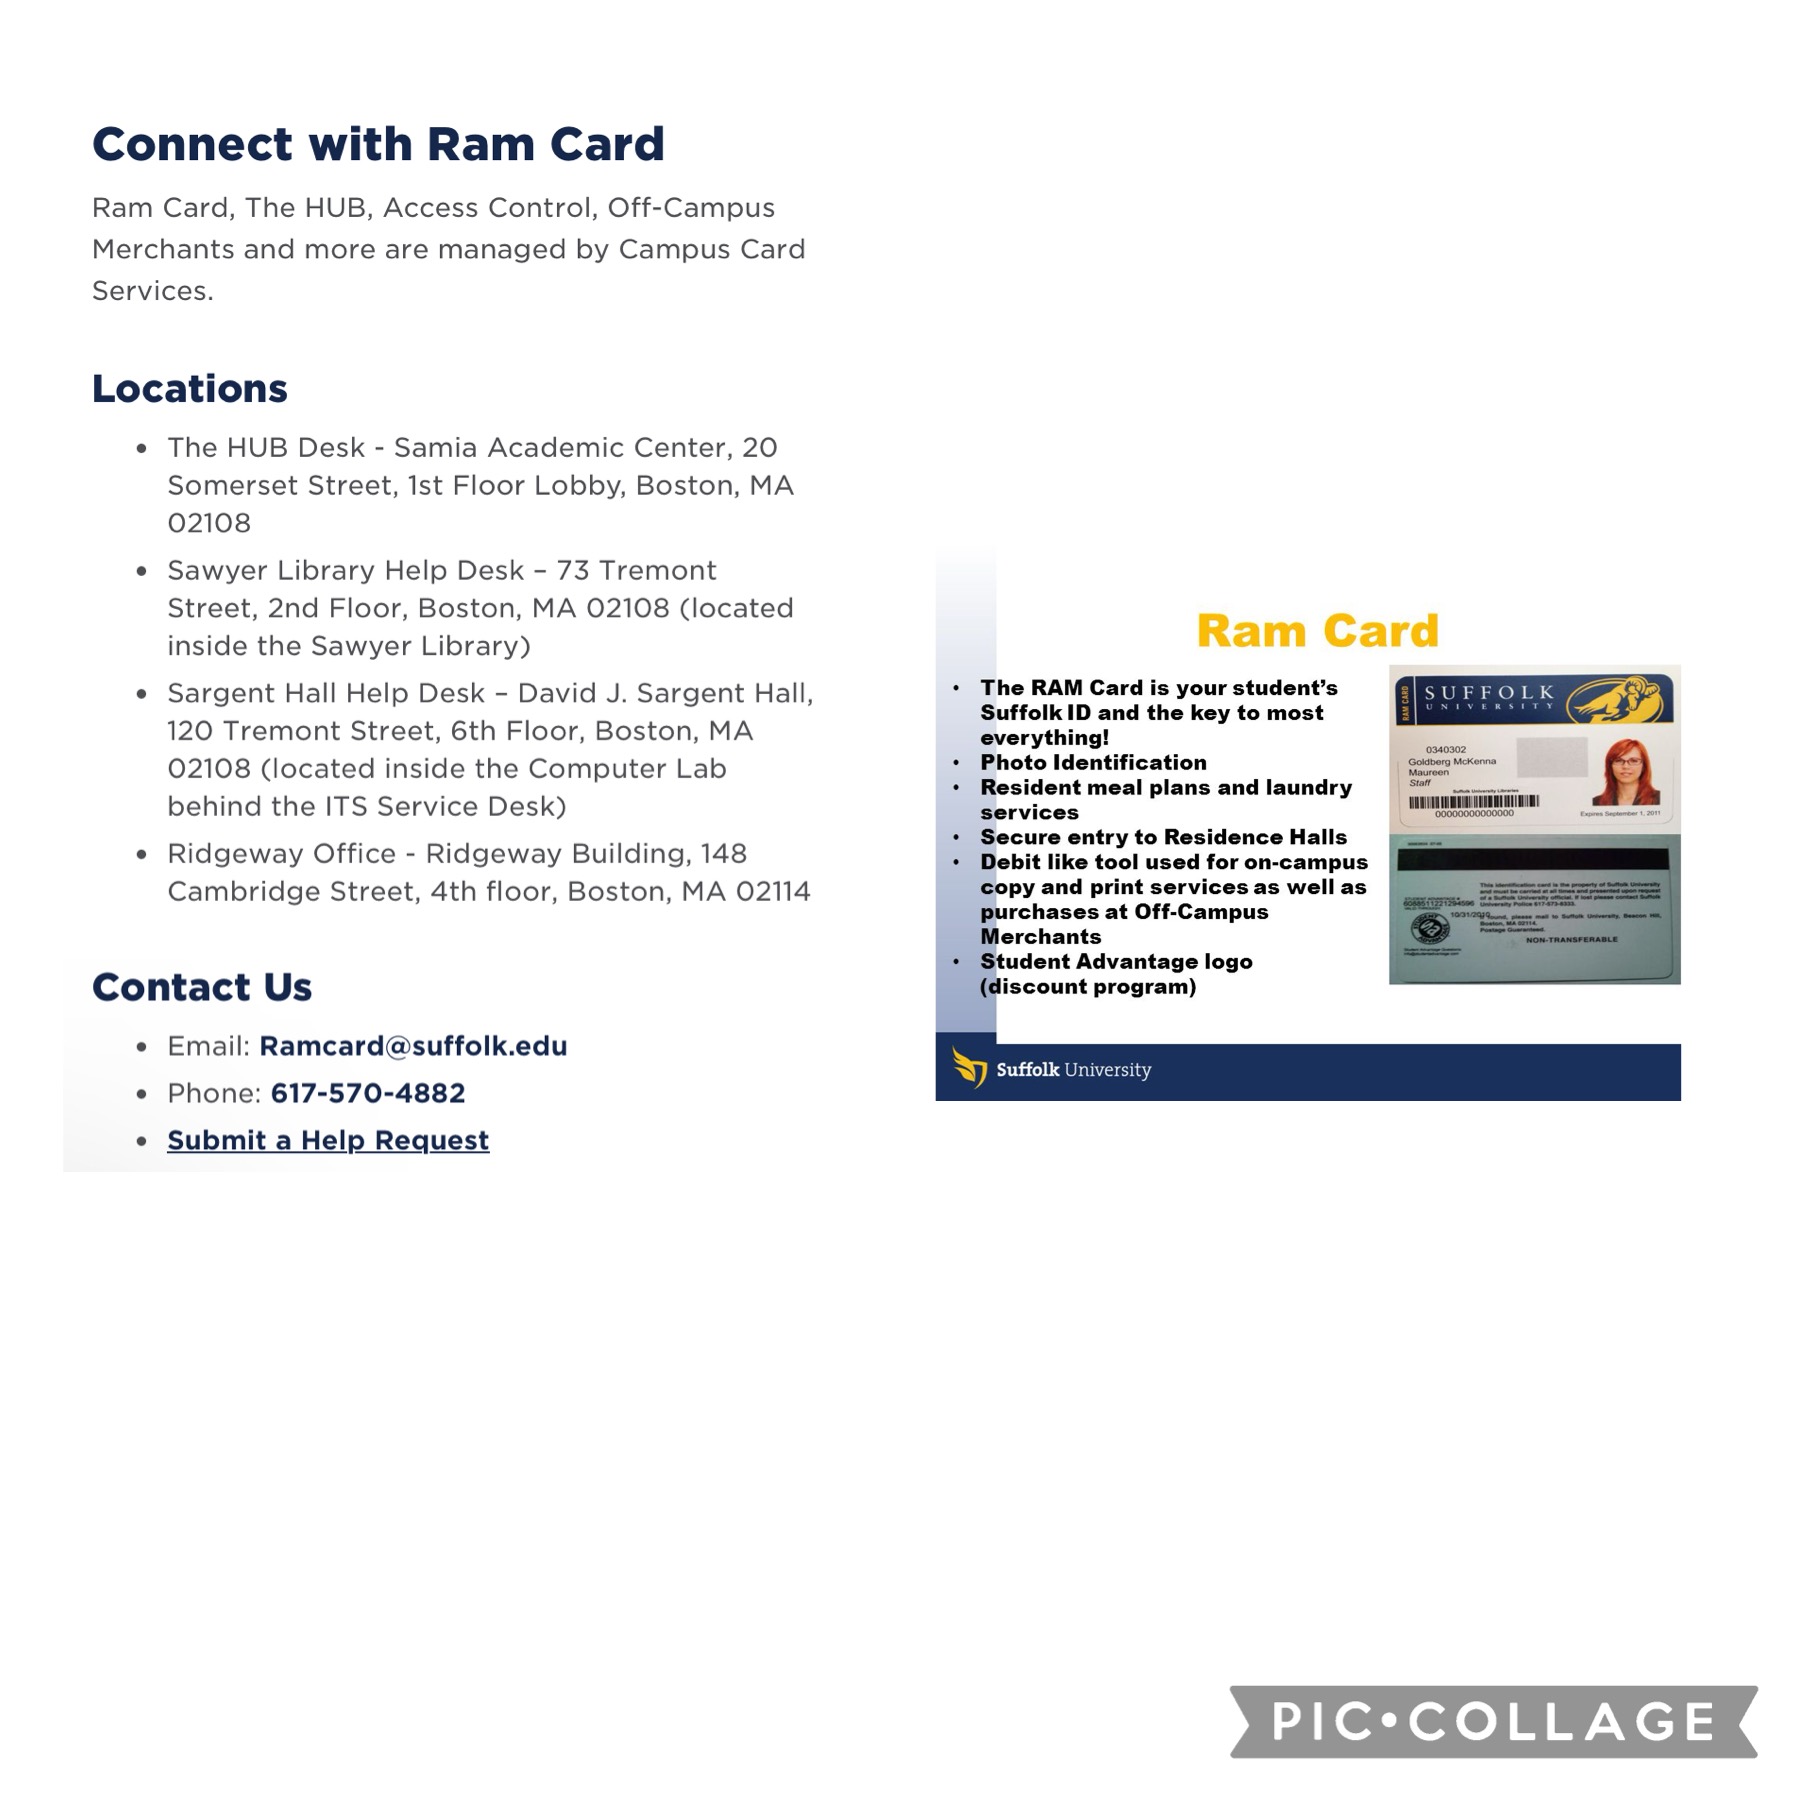 Instructions on what you can use the RAM card for, as well as locations to get help!!